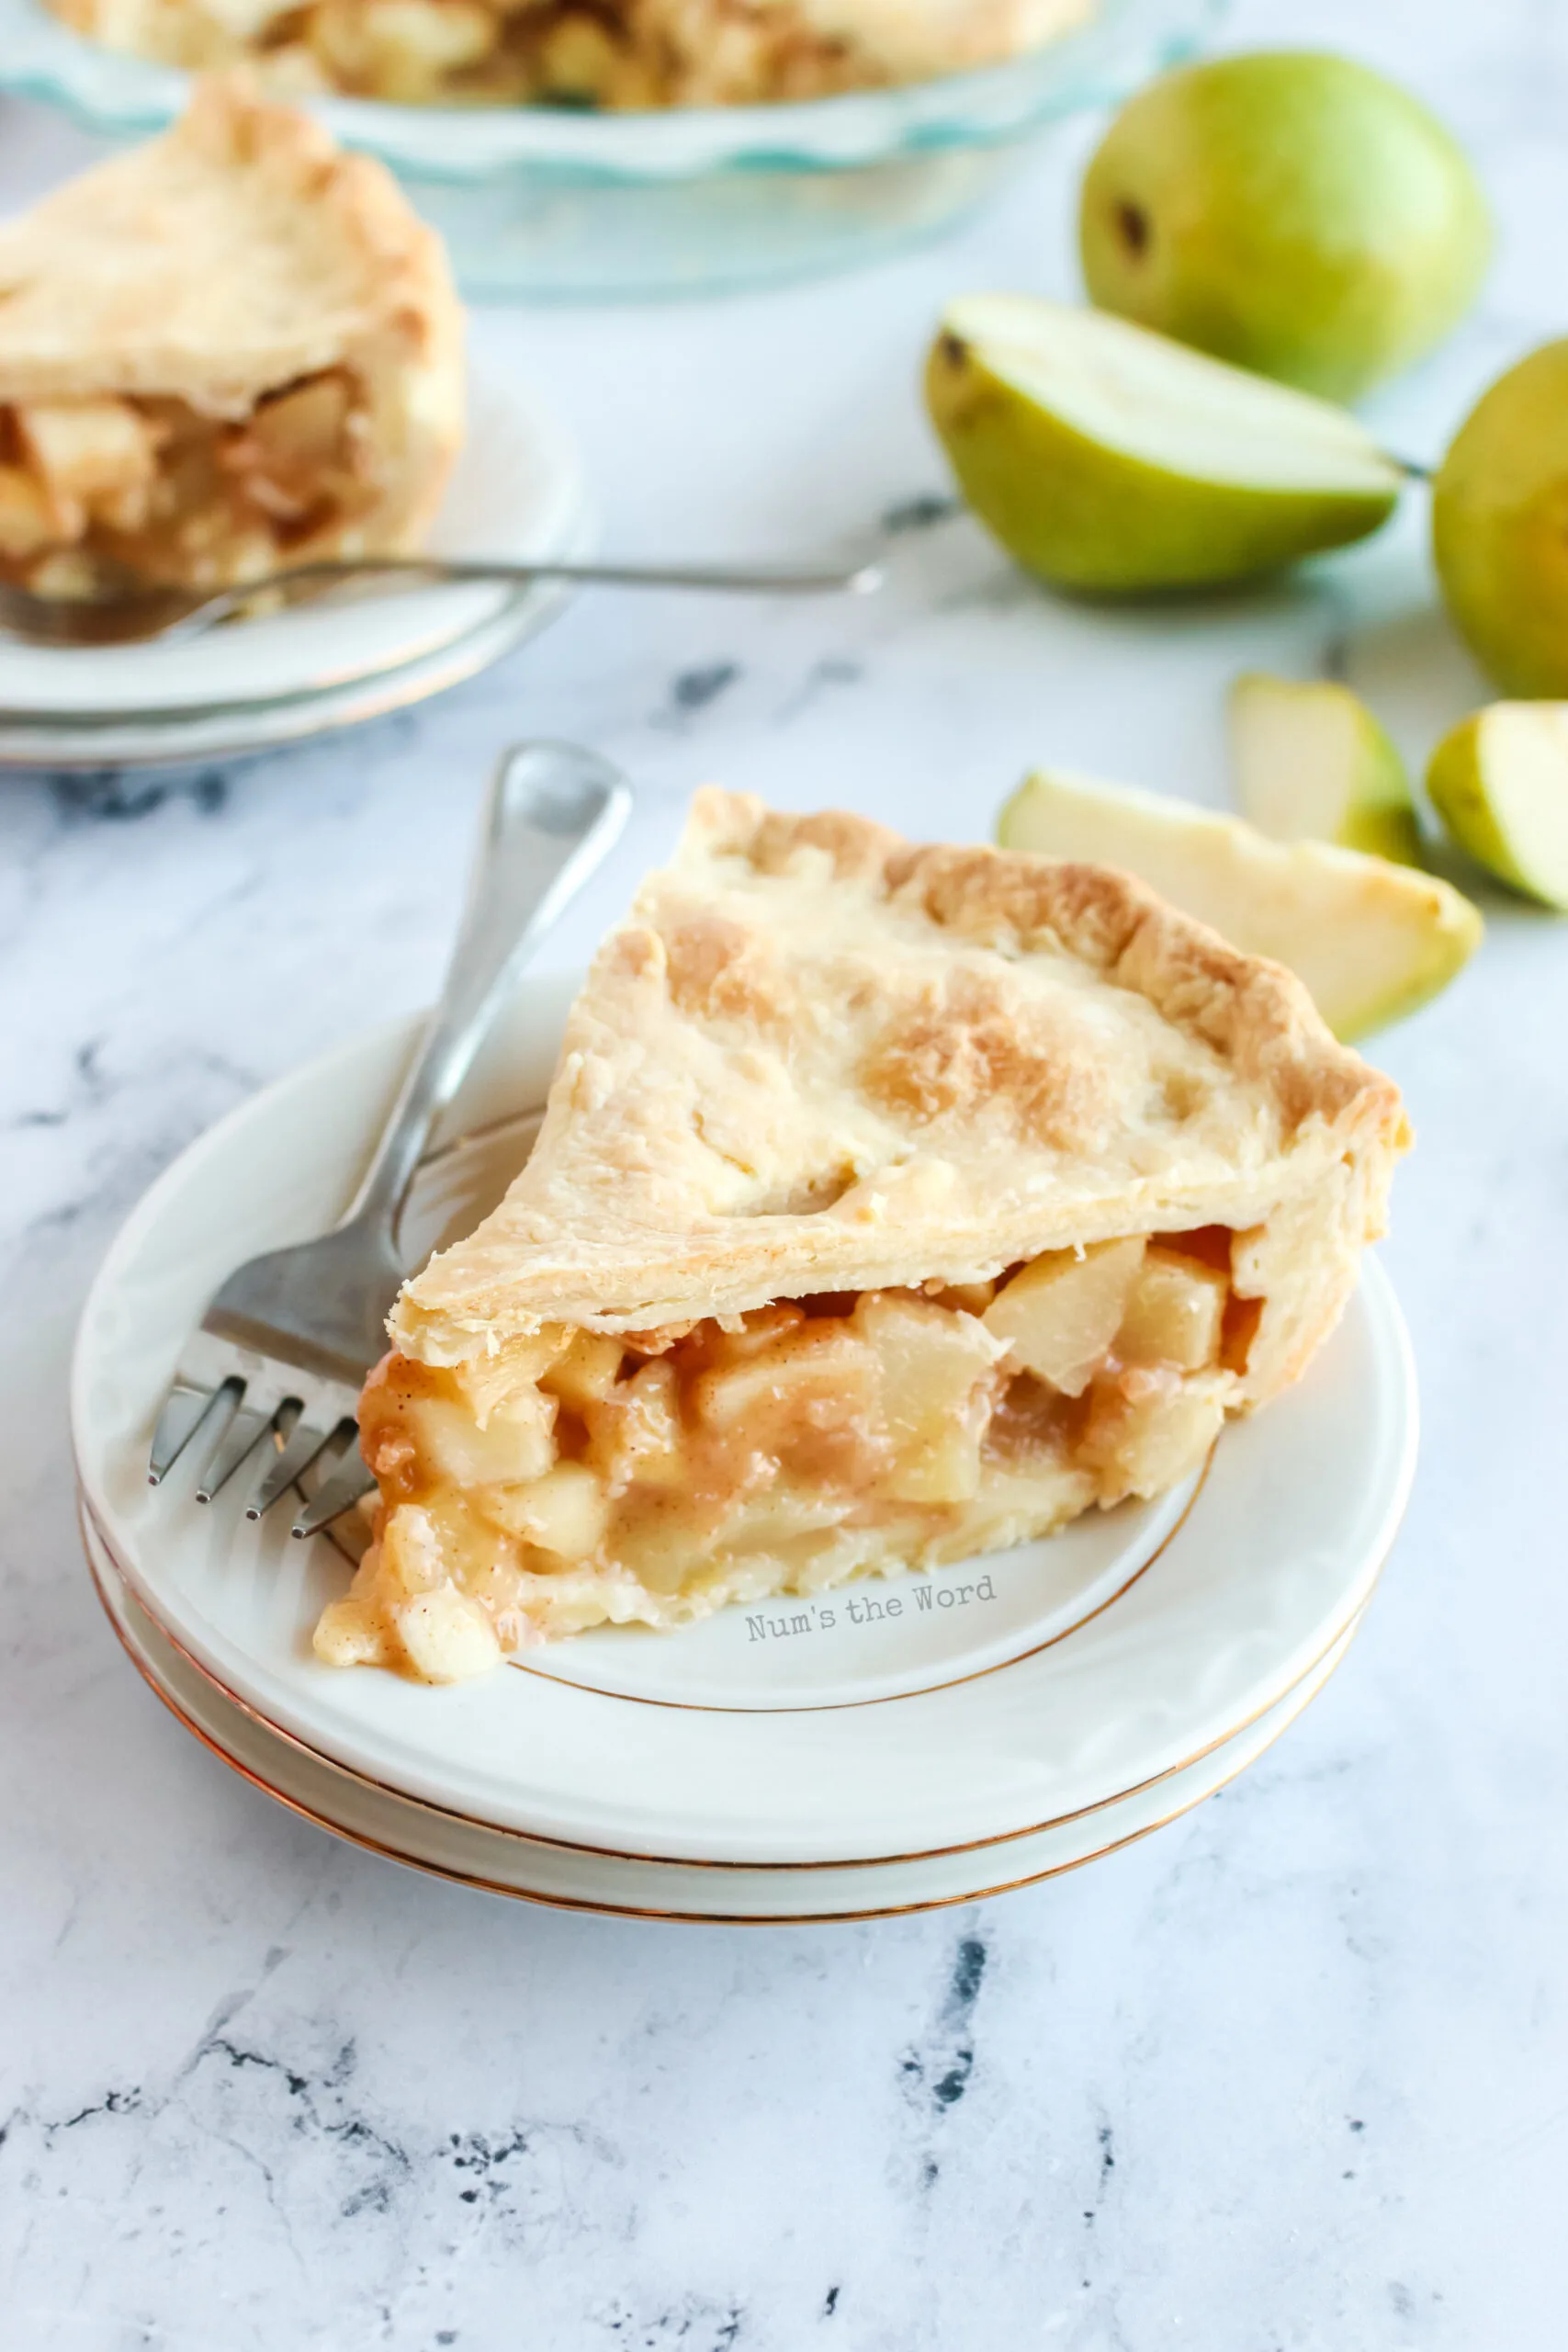 A slice of pear pie on a plate ready to be eaten - zoomed out image